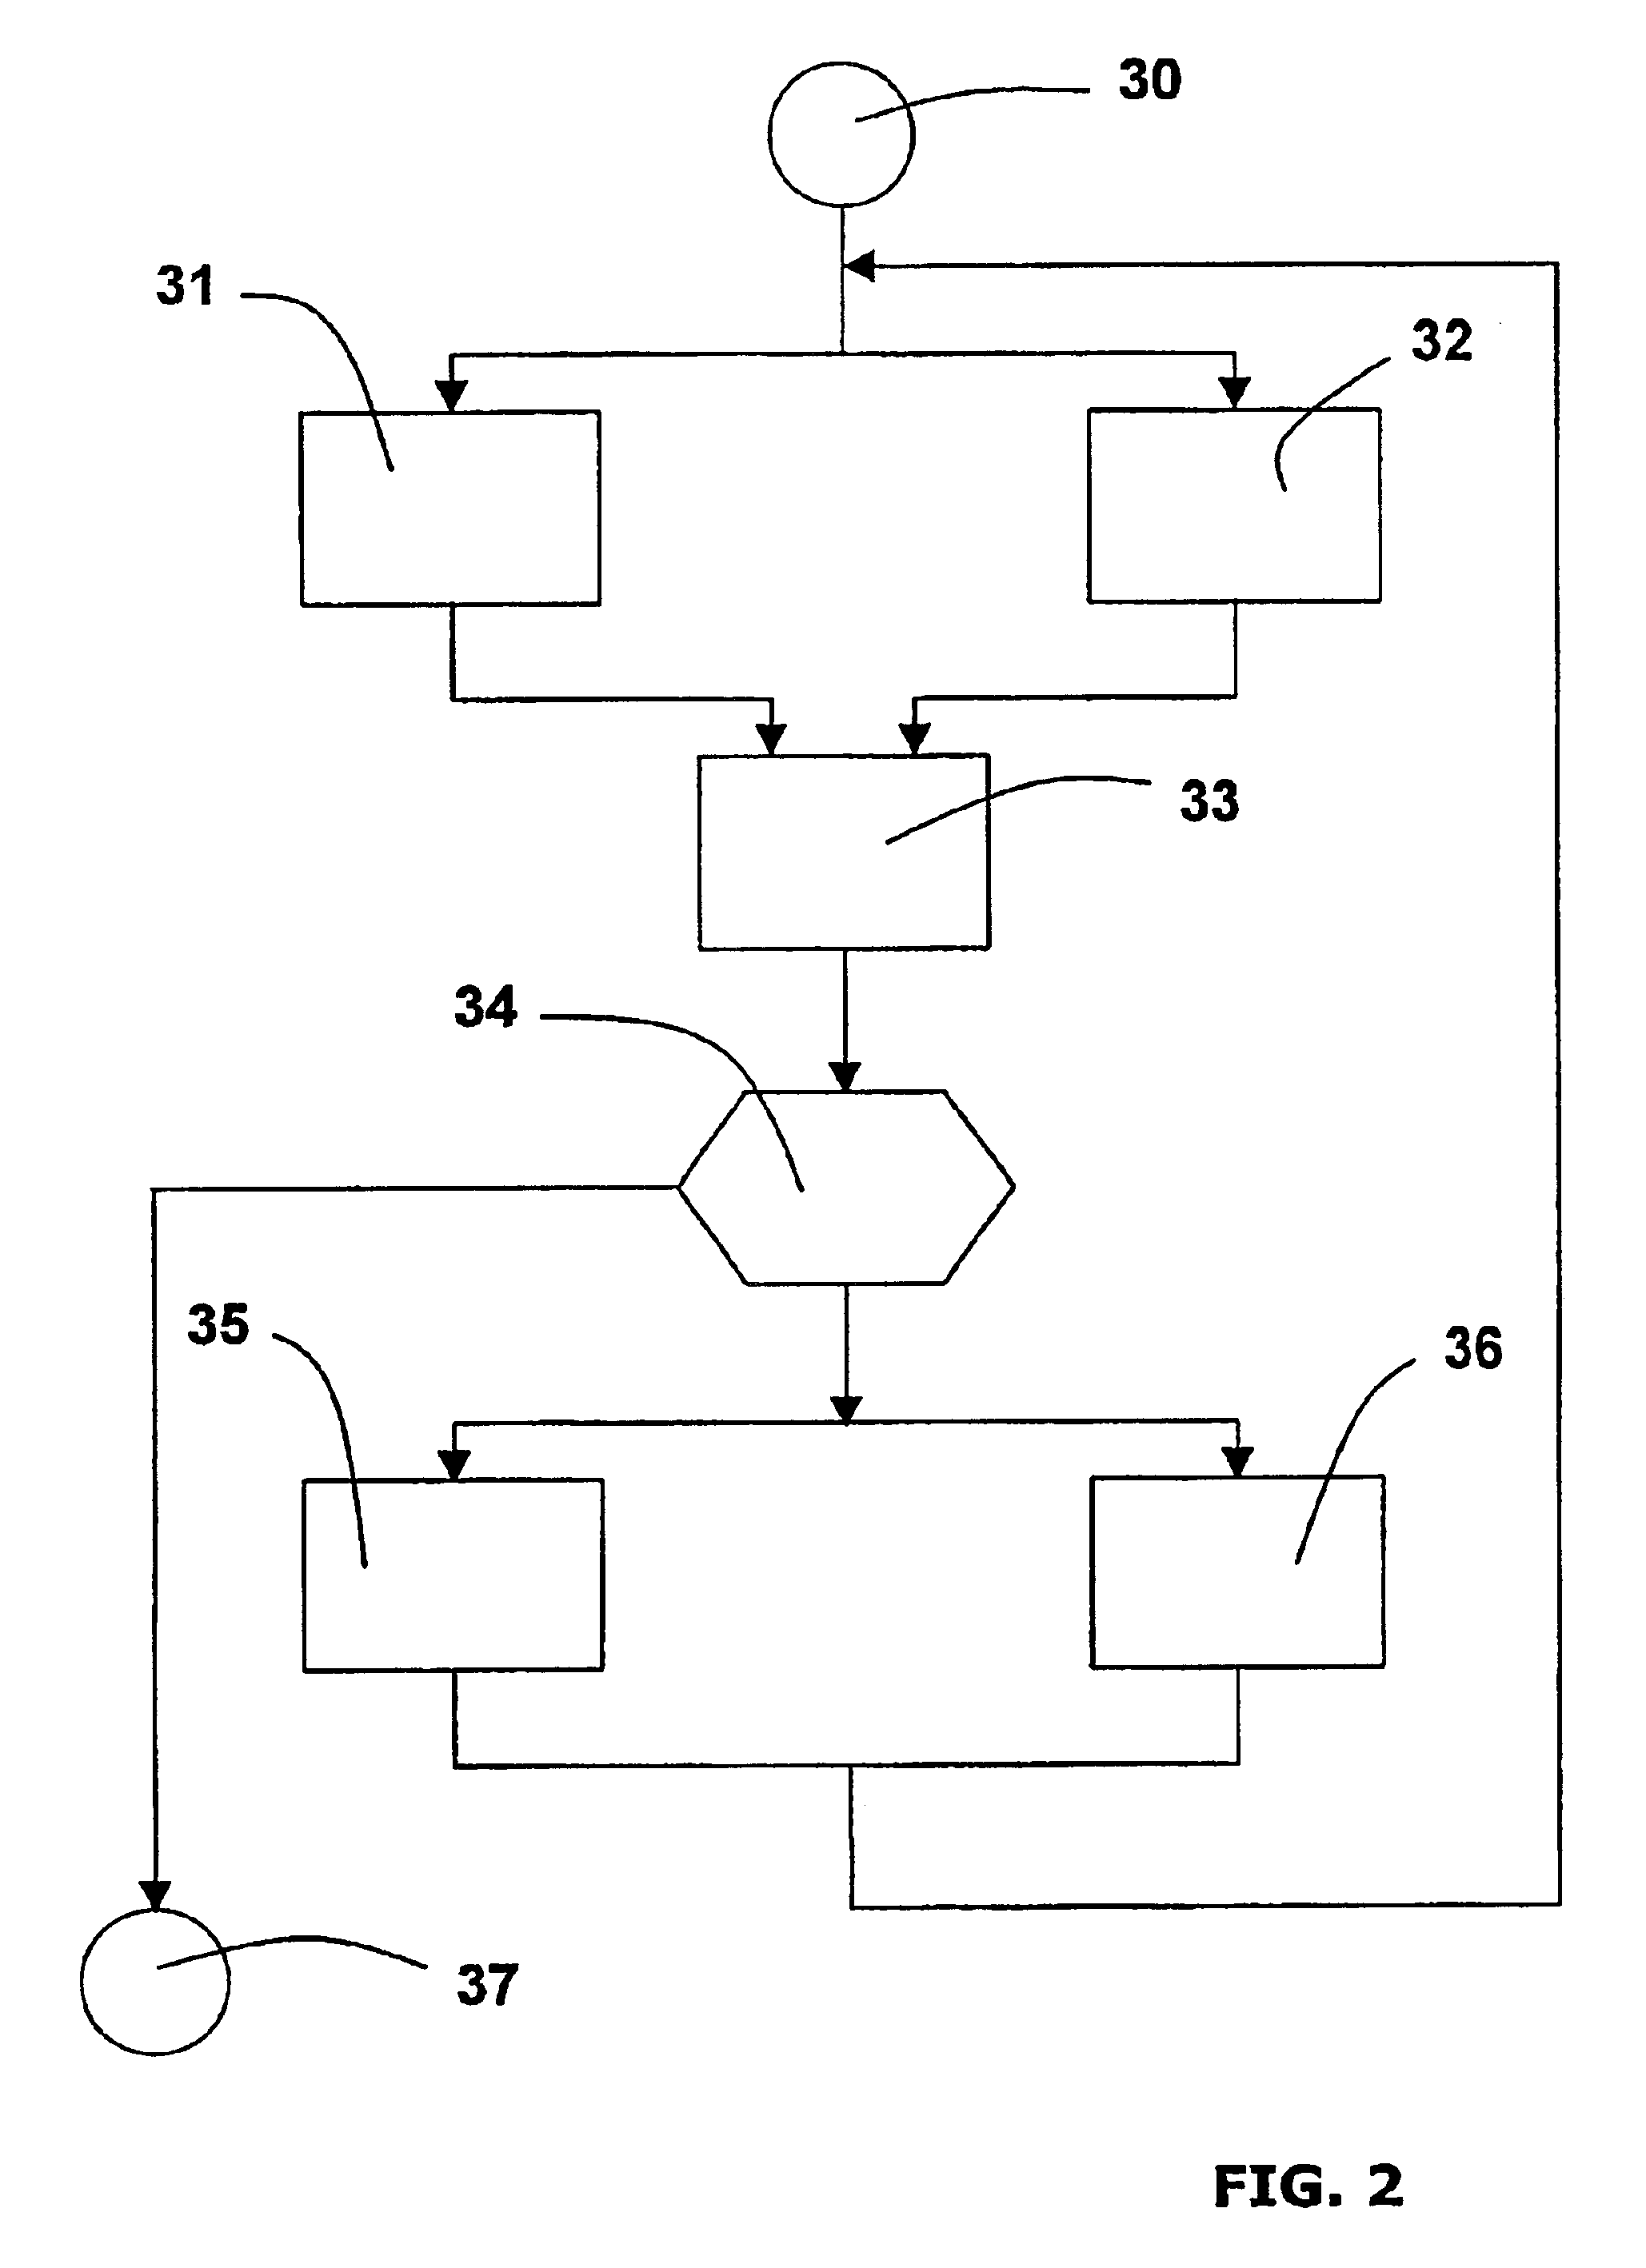 Method and apparatus for the dynamic balancing of a rotating structure